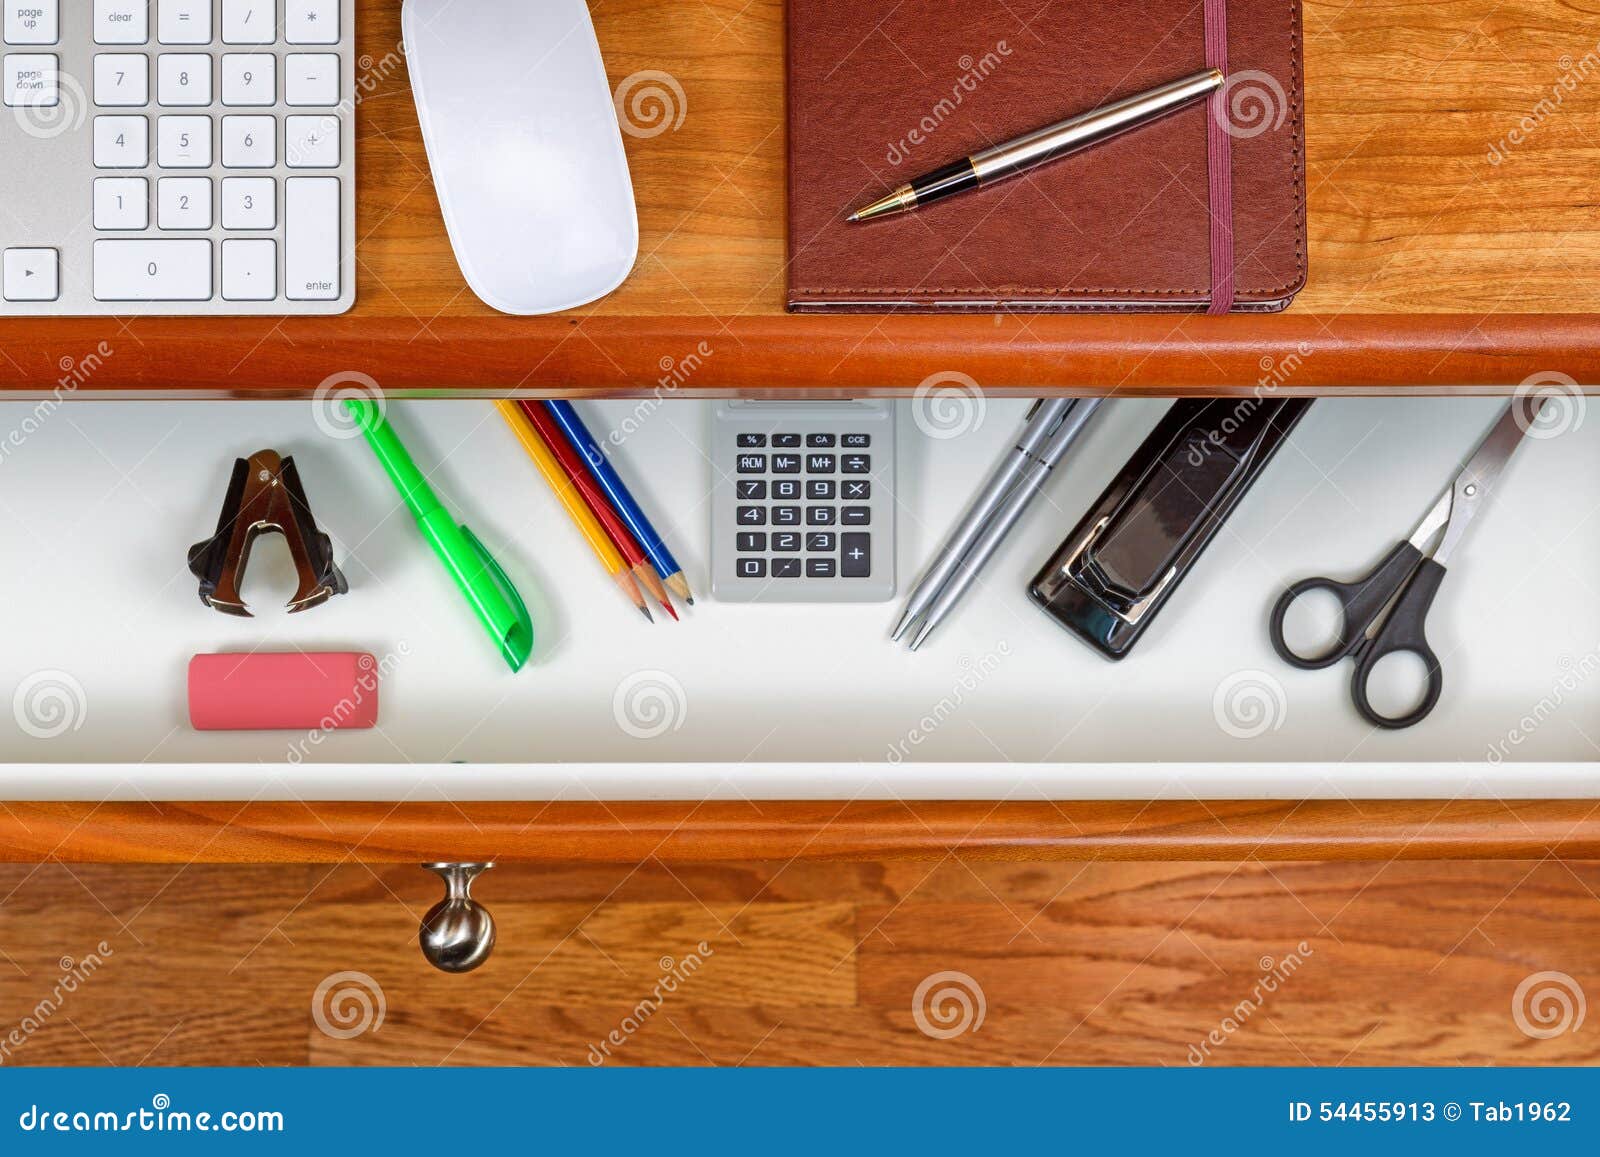 Solid Cherry Wood Office Desk For Work Stock Image Image Of